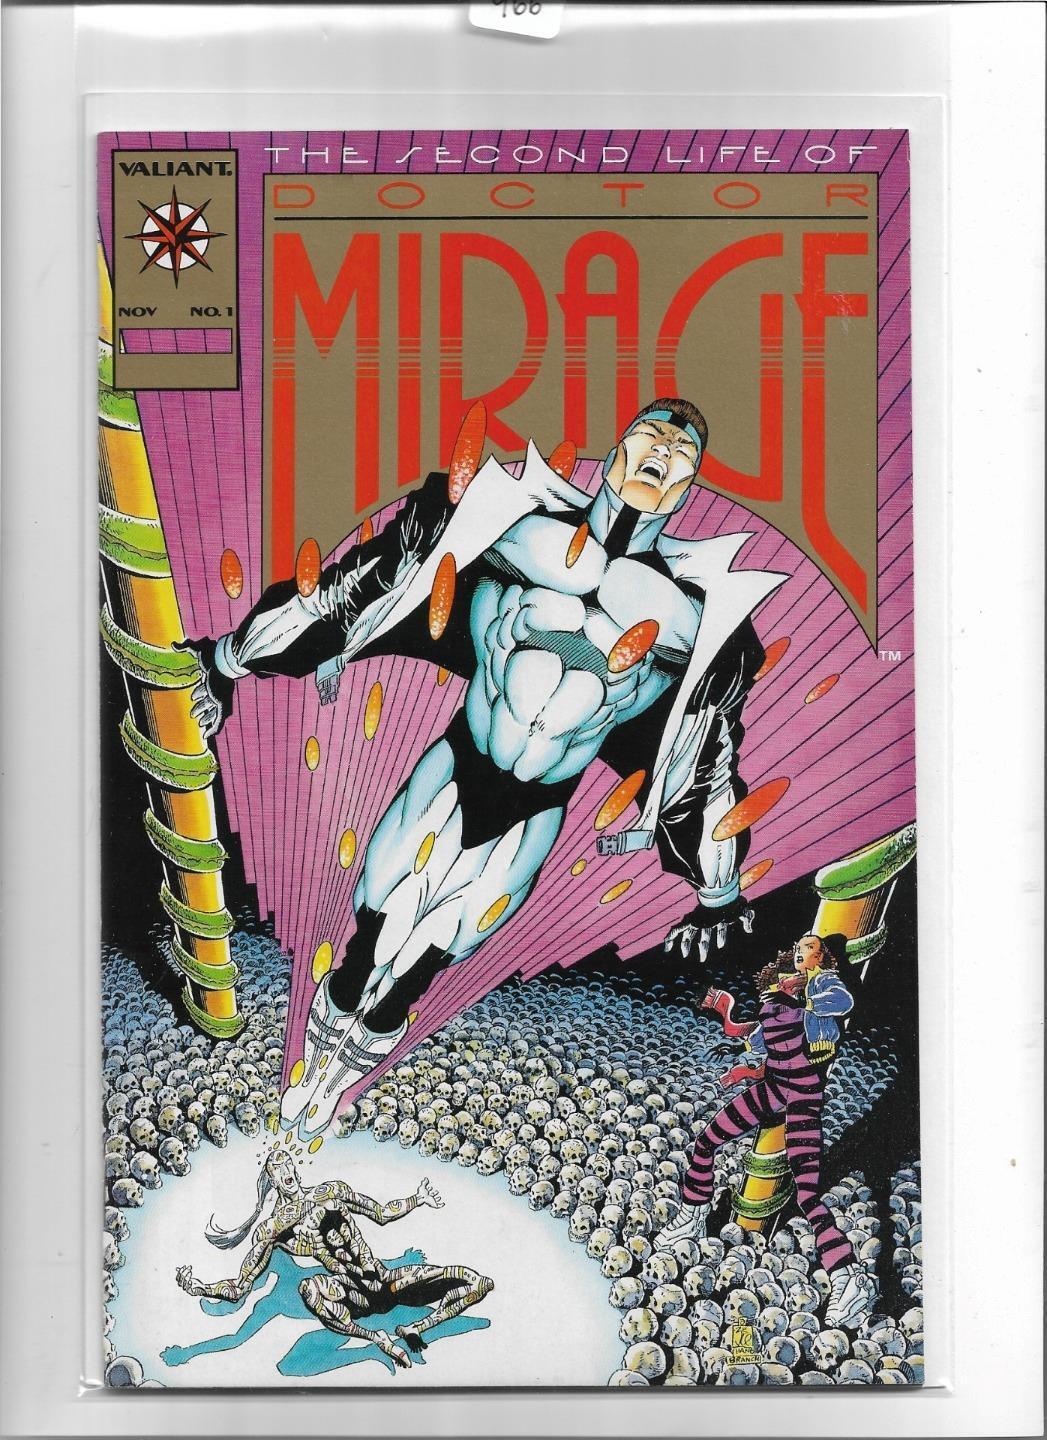 THE SECOND LIFE OF DOCTOR MIRAGE #1 1993 VERY FINE-NEAR MINT 9.0 966